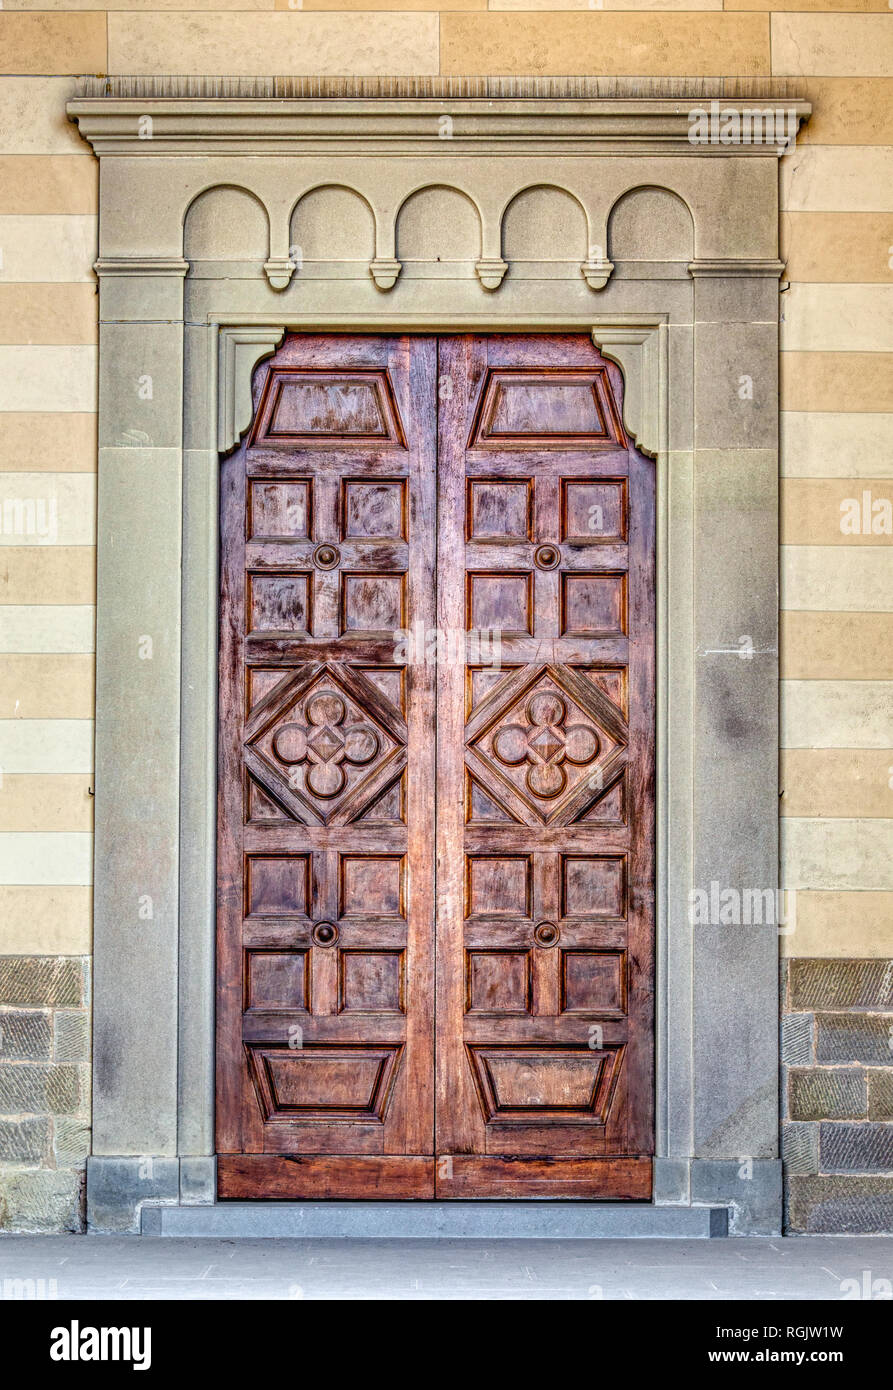 Photograph taken in the medieval village of Cortona in the heart of Tuscany. A weathered brown wood carved door has a hand carved stone frame. Stock Photo